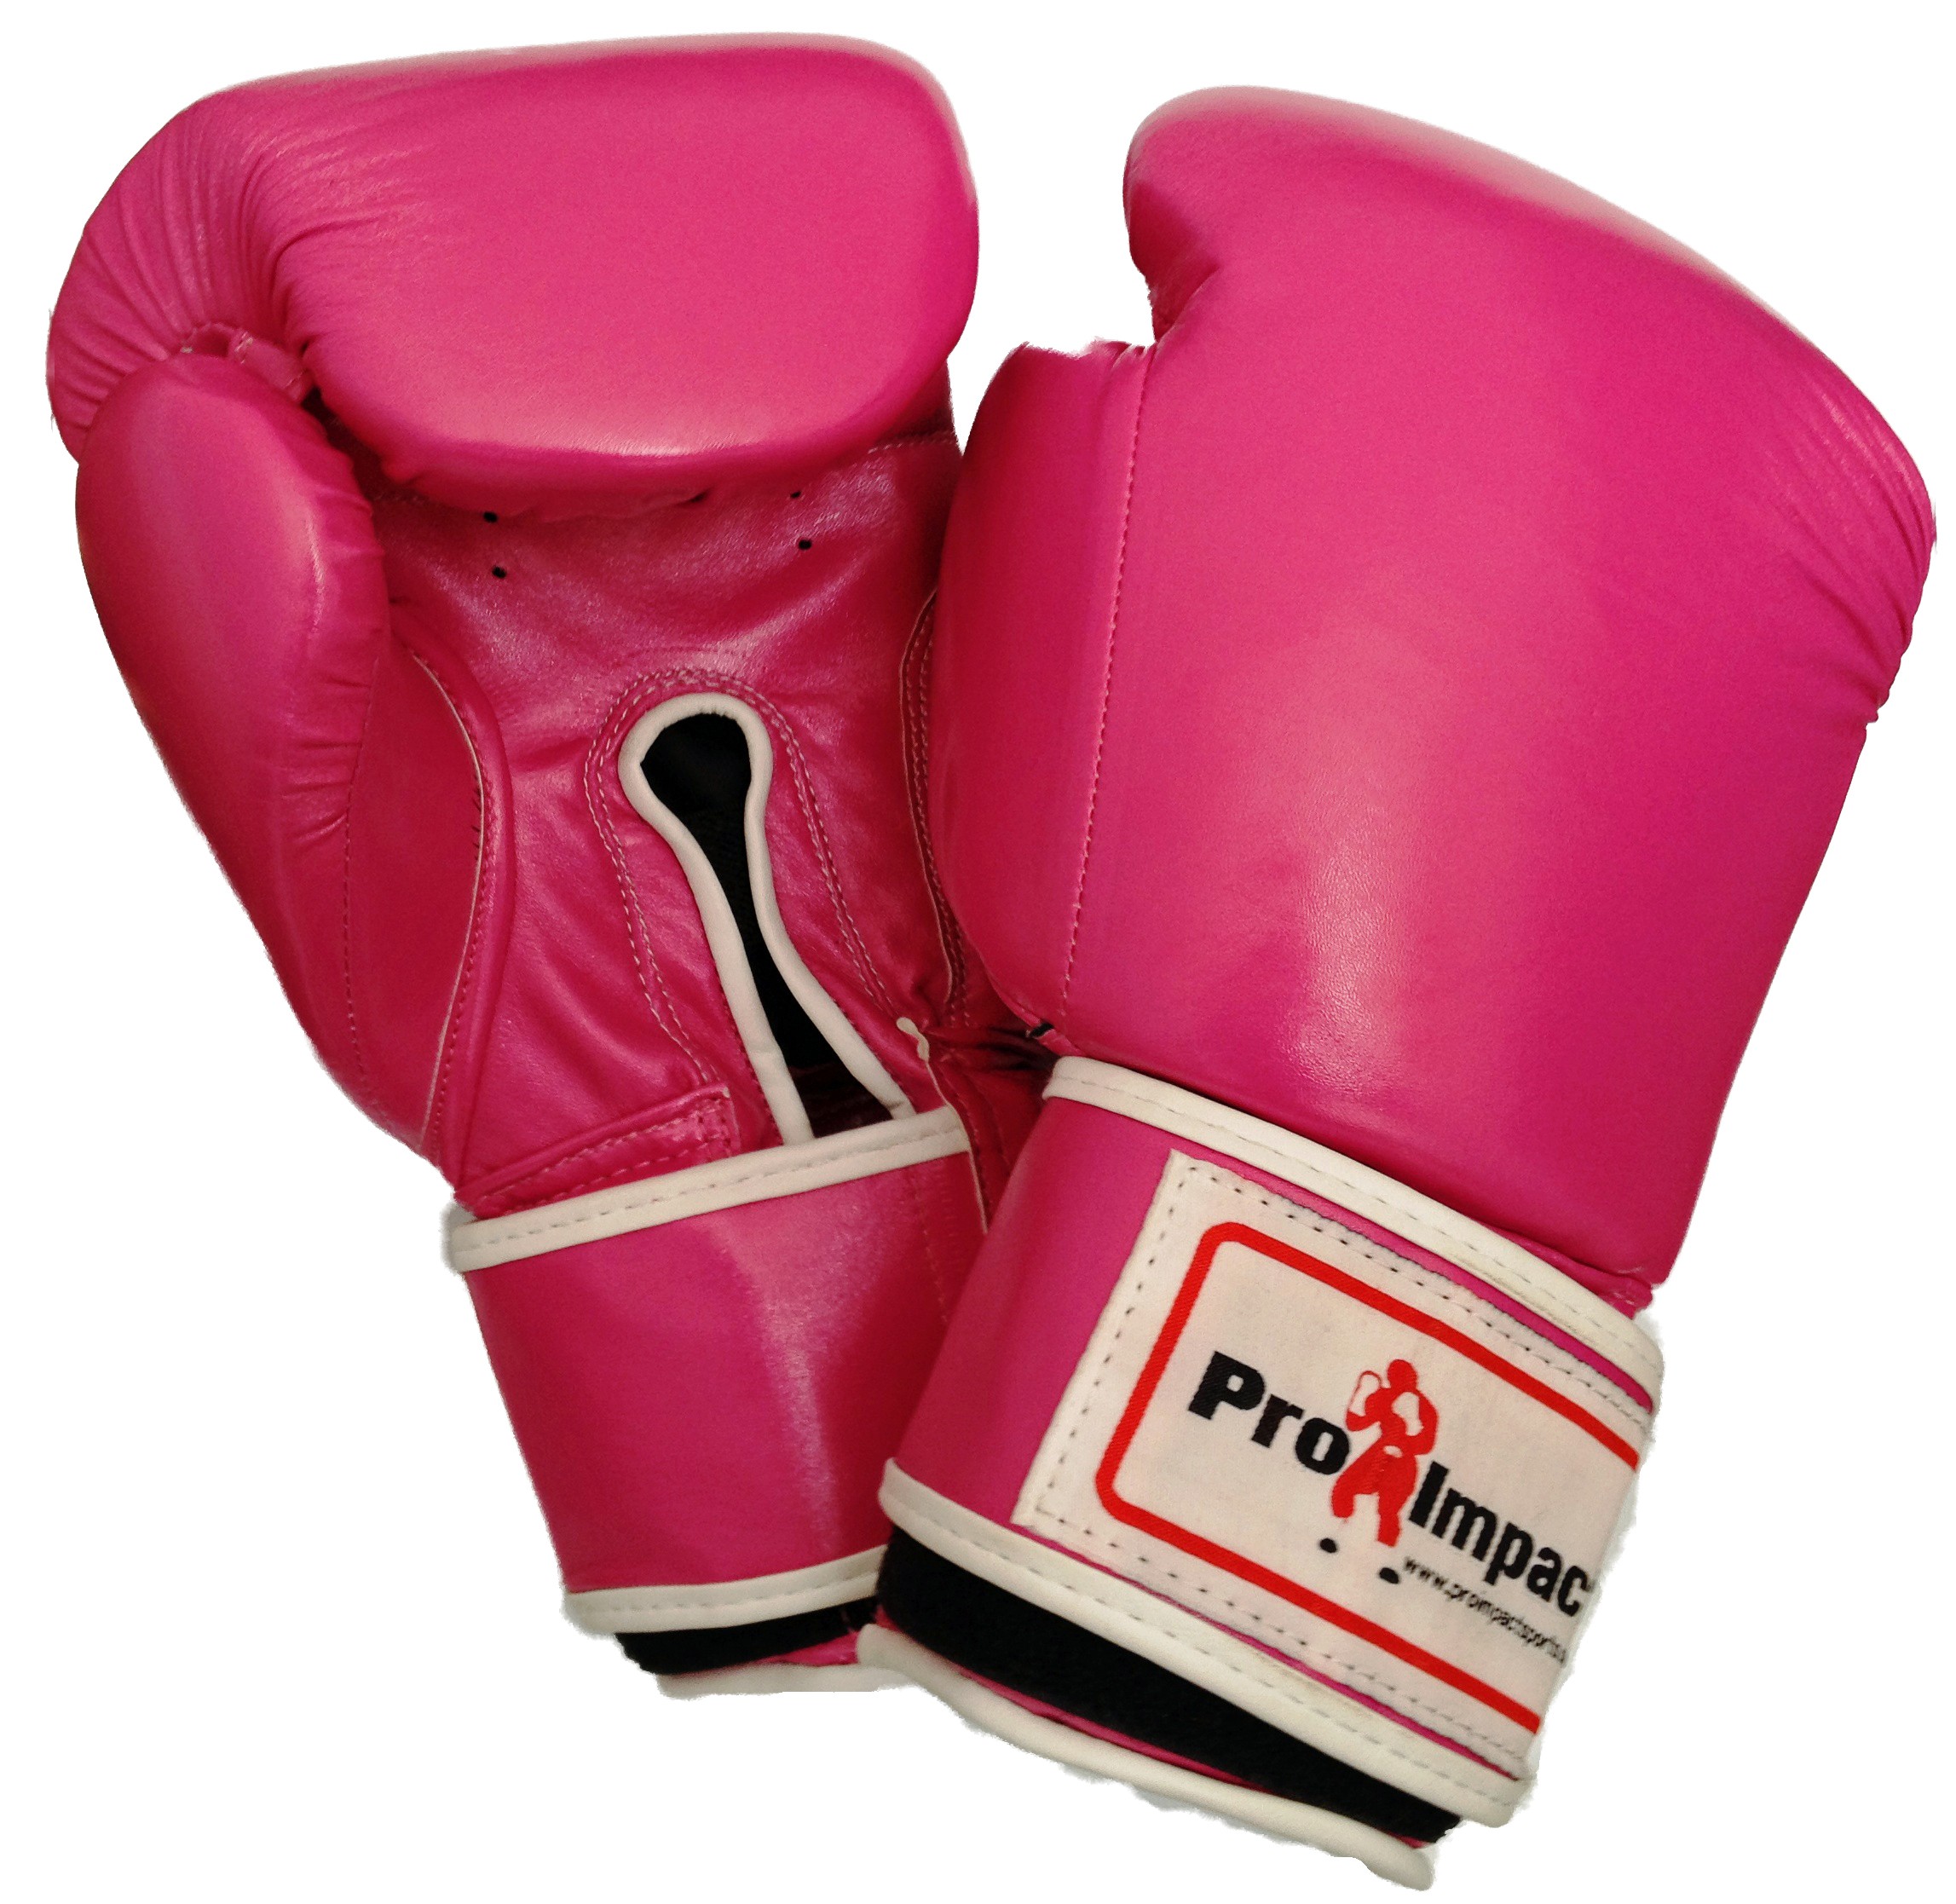 Clip Arts Related To : Drive Womens Boxing Gloves Boxing Glove. view all .....